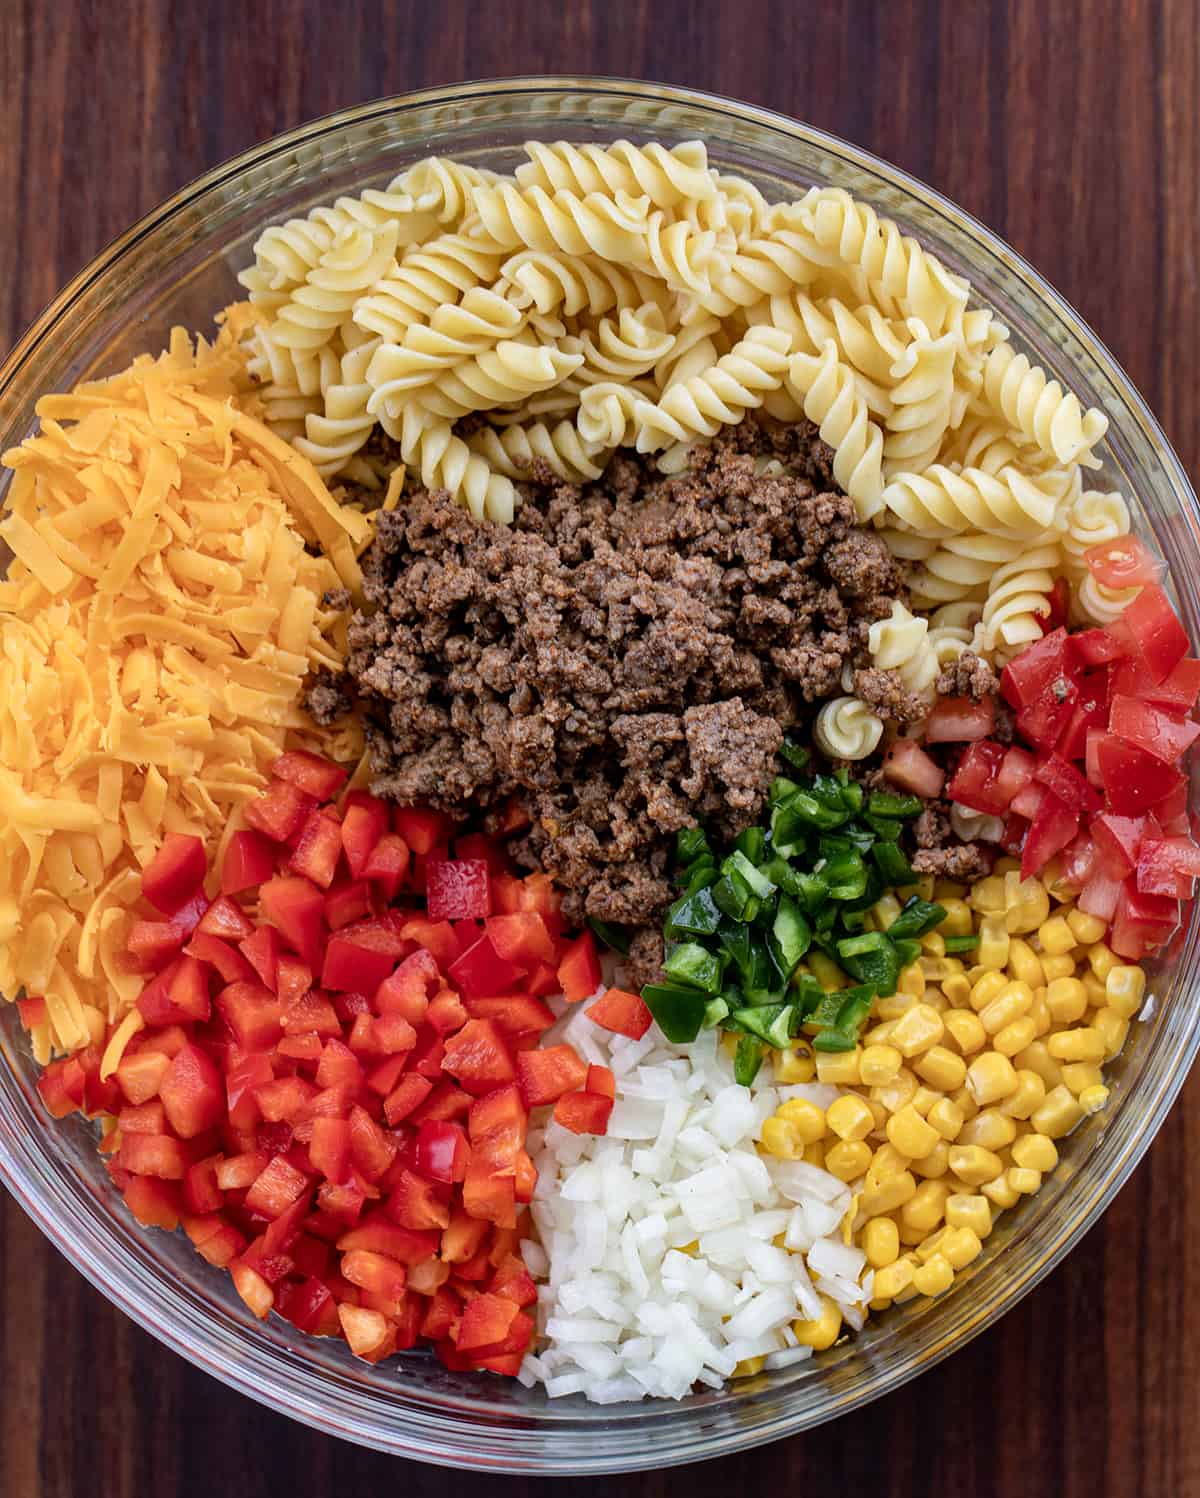 Ingredients for Taco Pasta Salad Before Mixing.